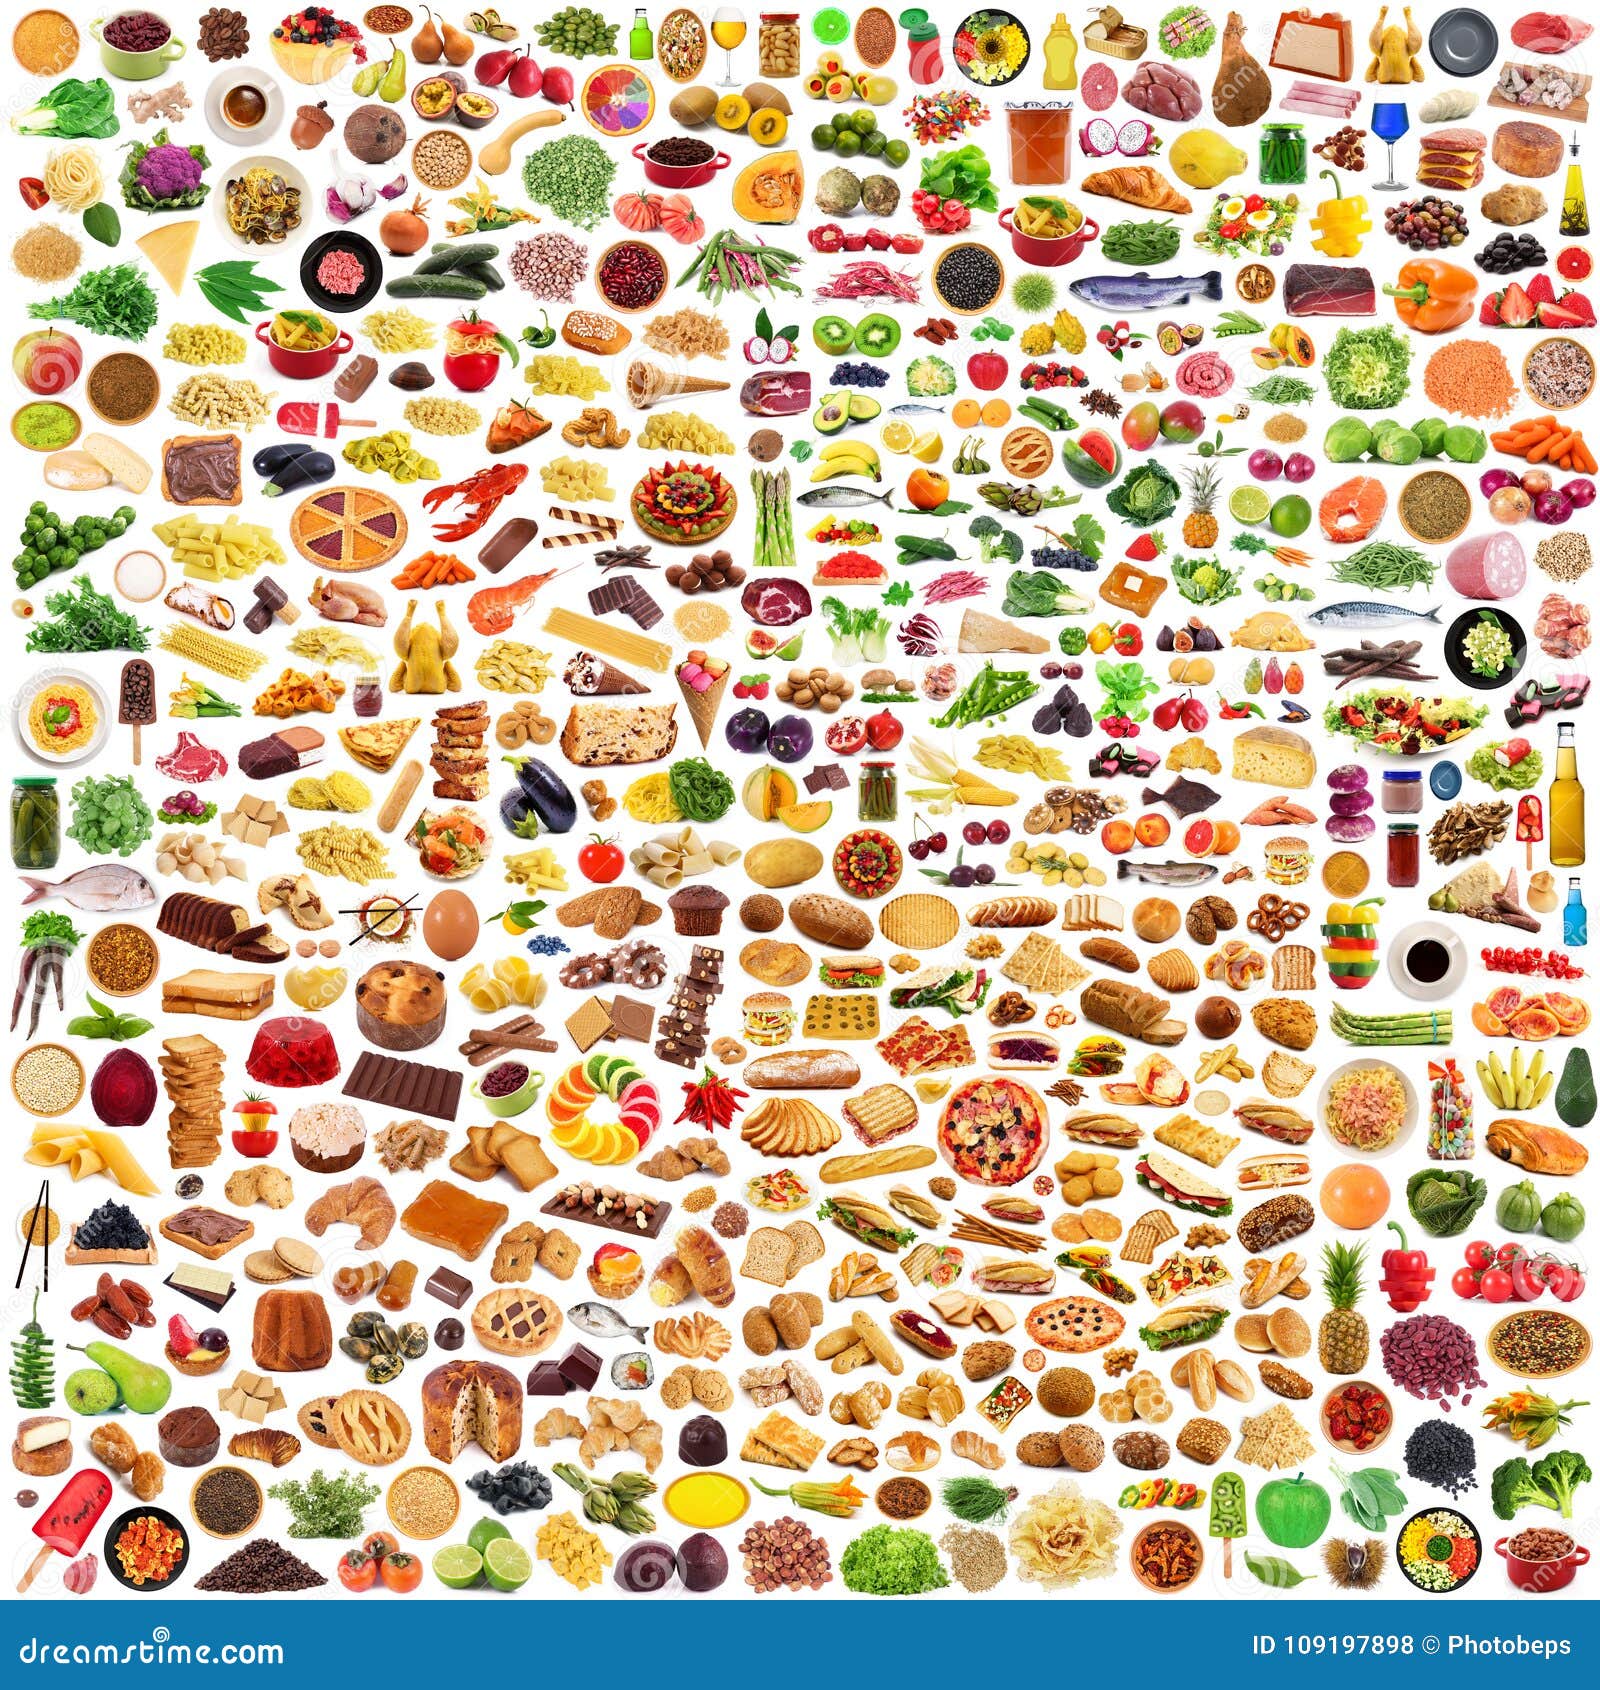 global gastronomy collage in white background